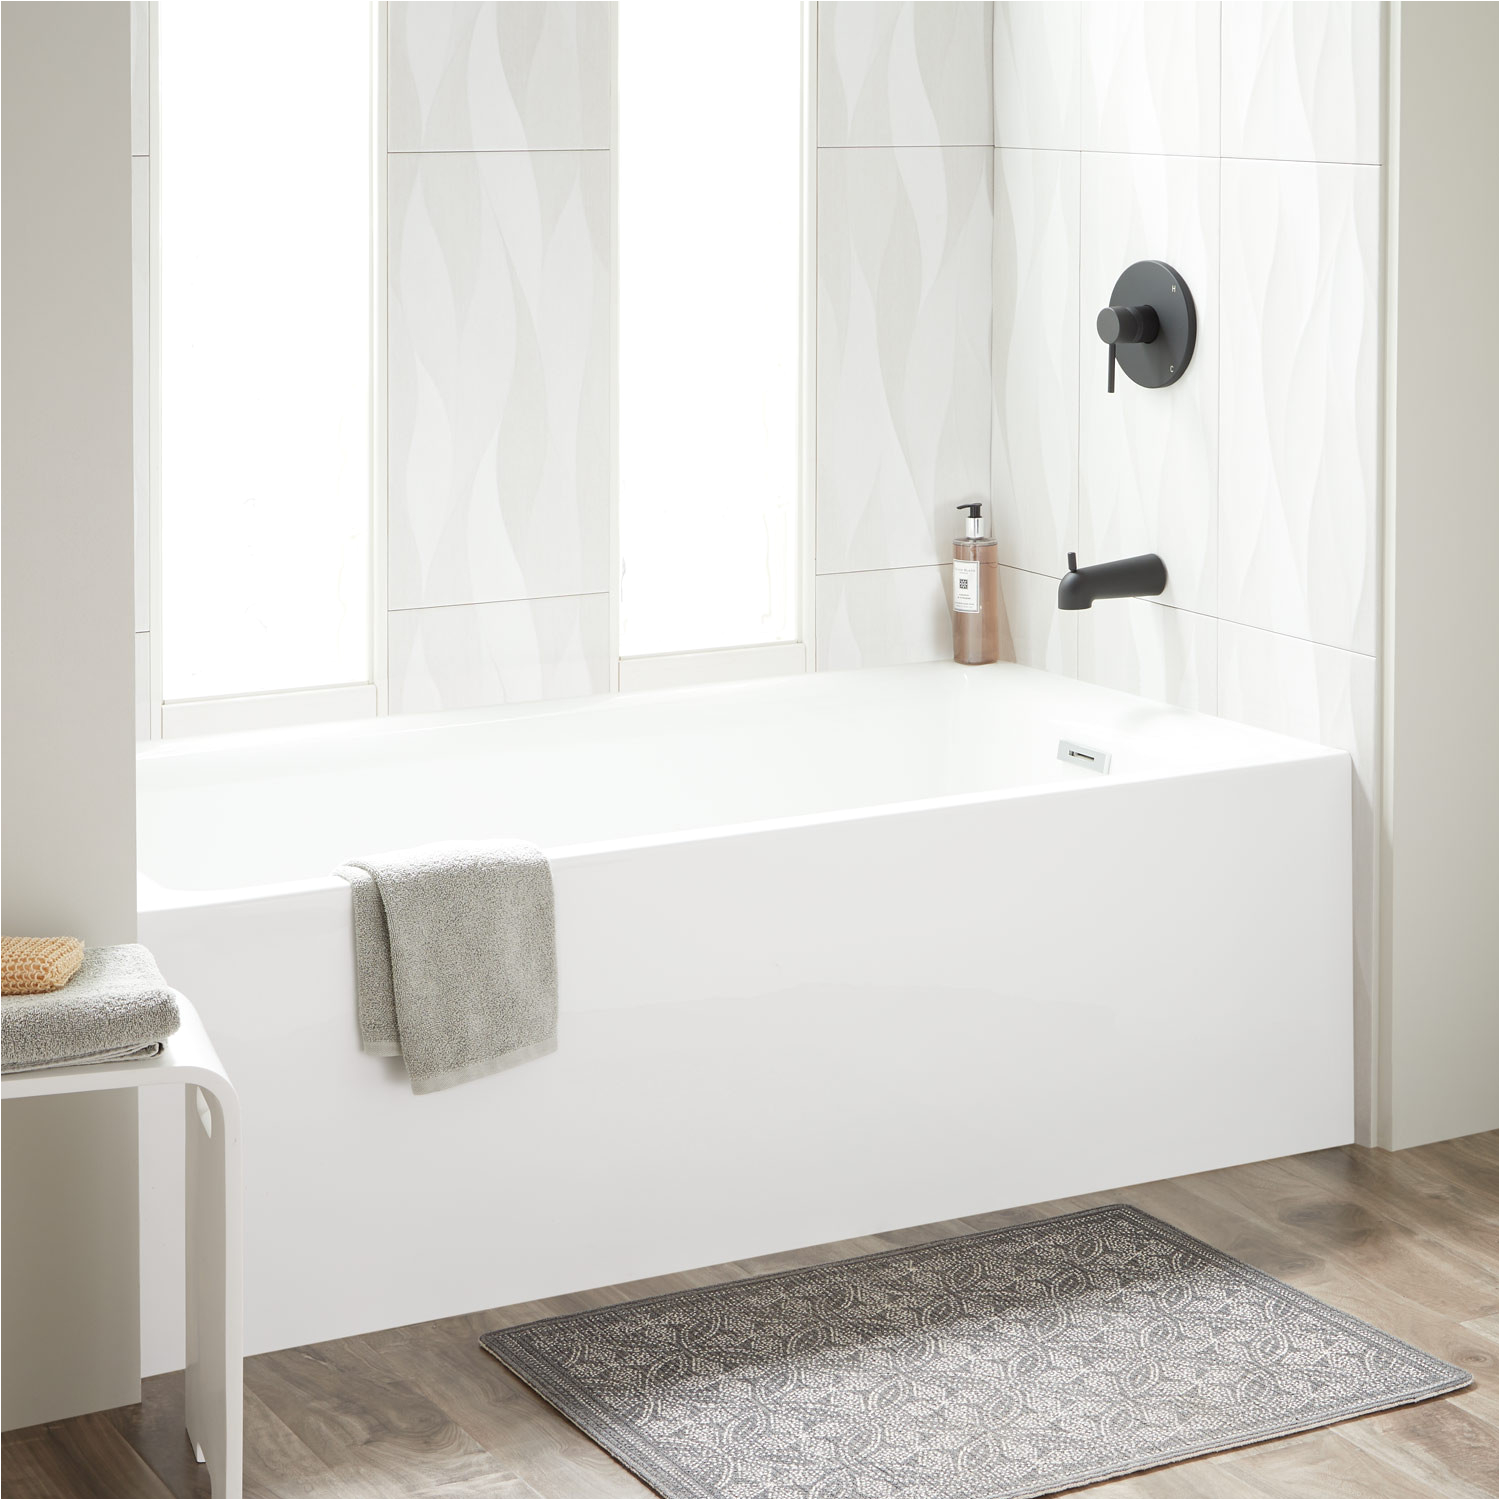 60 rolfe acrylic alcove tub in white